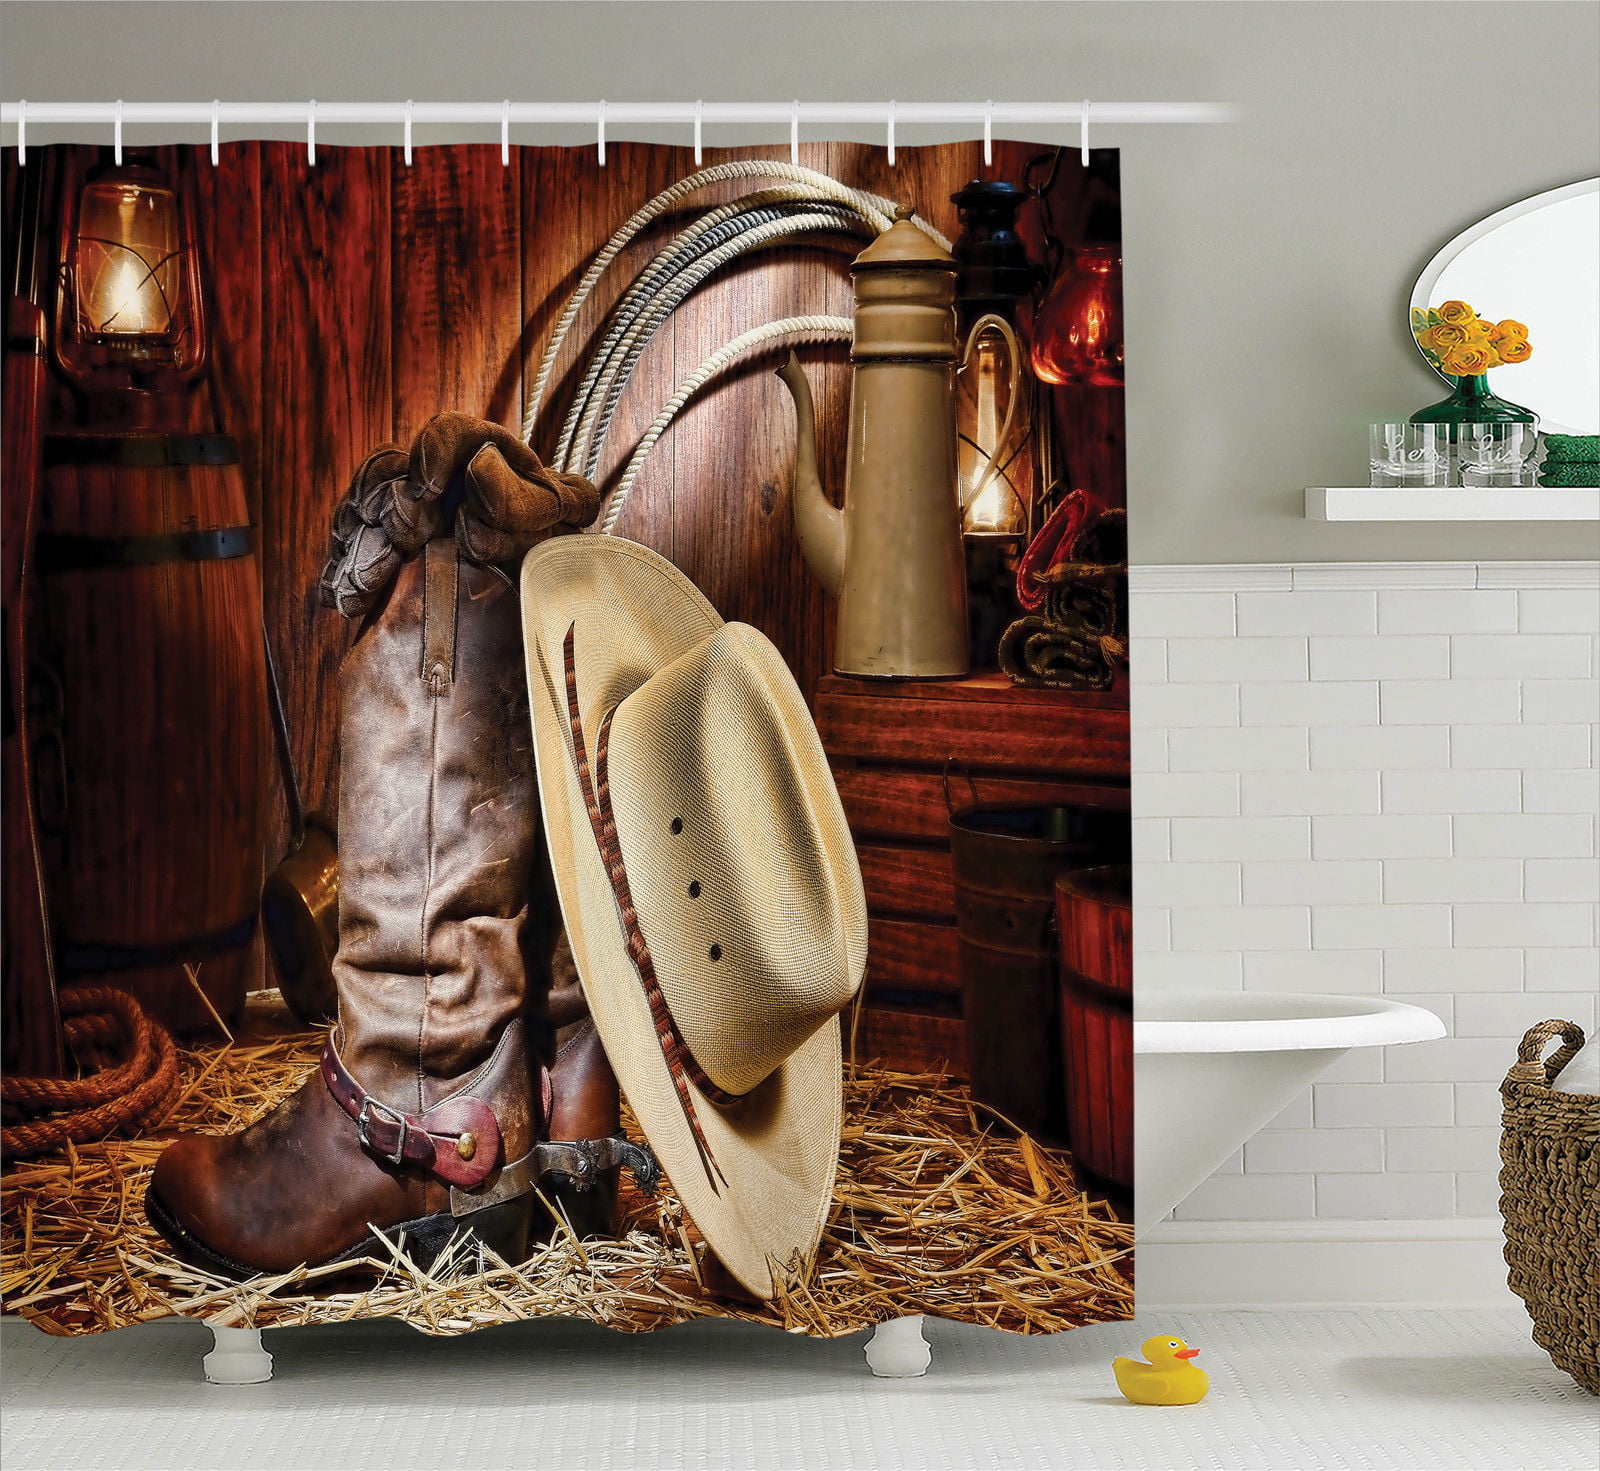 12 Details about   US Waterproof American West Cowboy Bathroom Shower Curtain Home Decor 